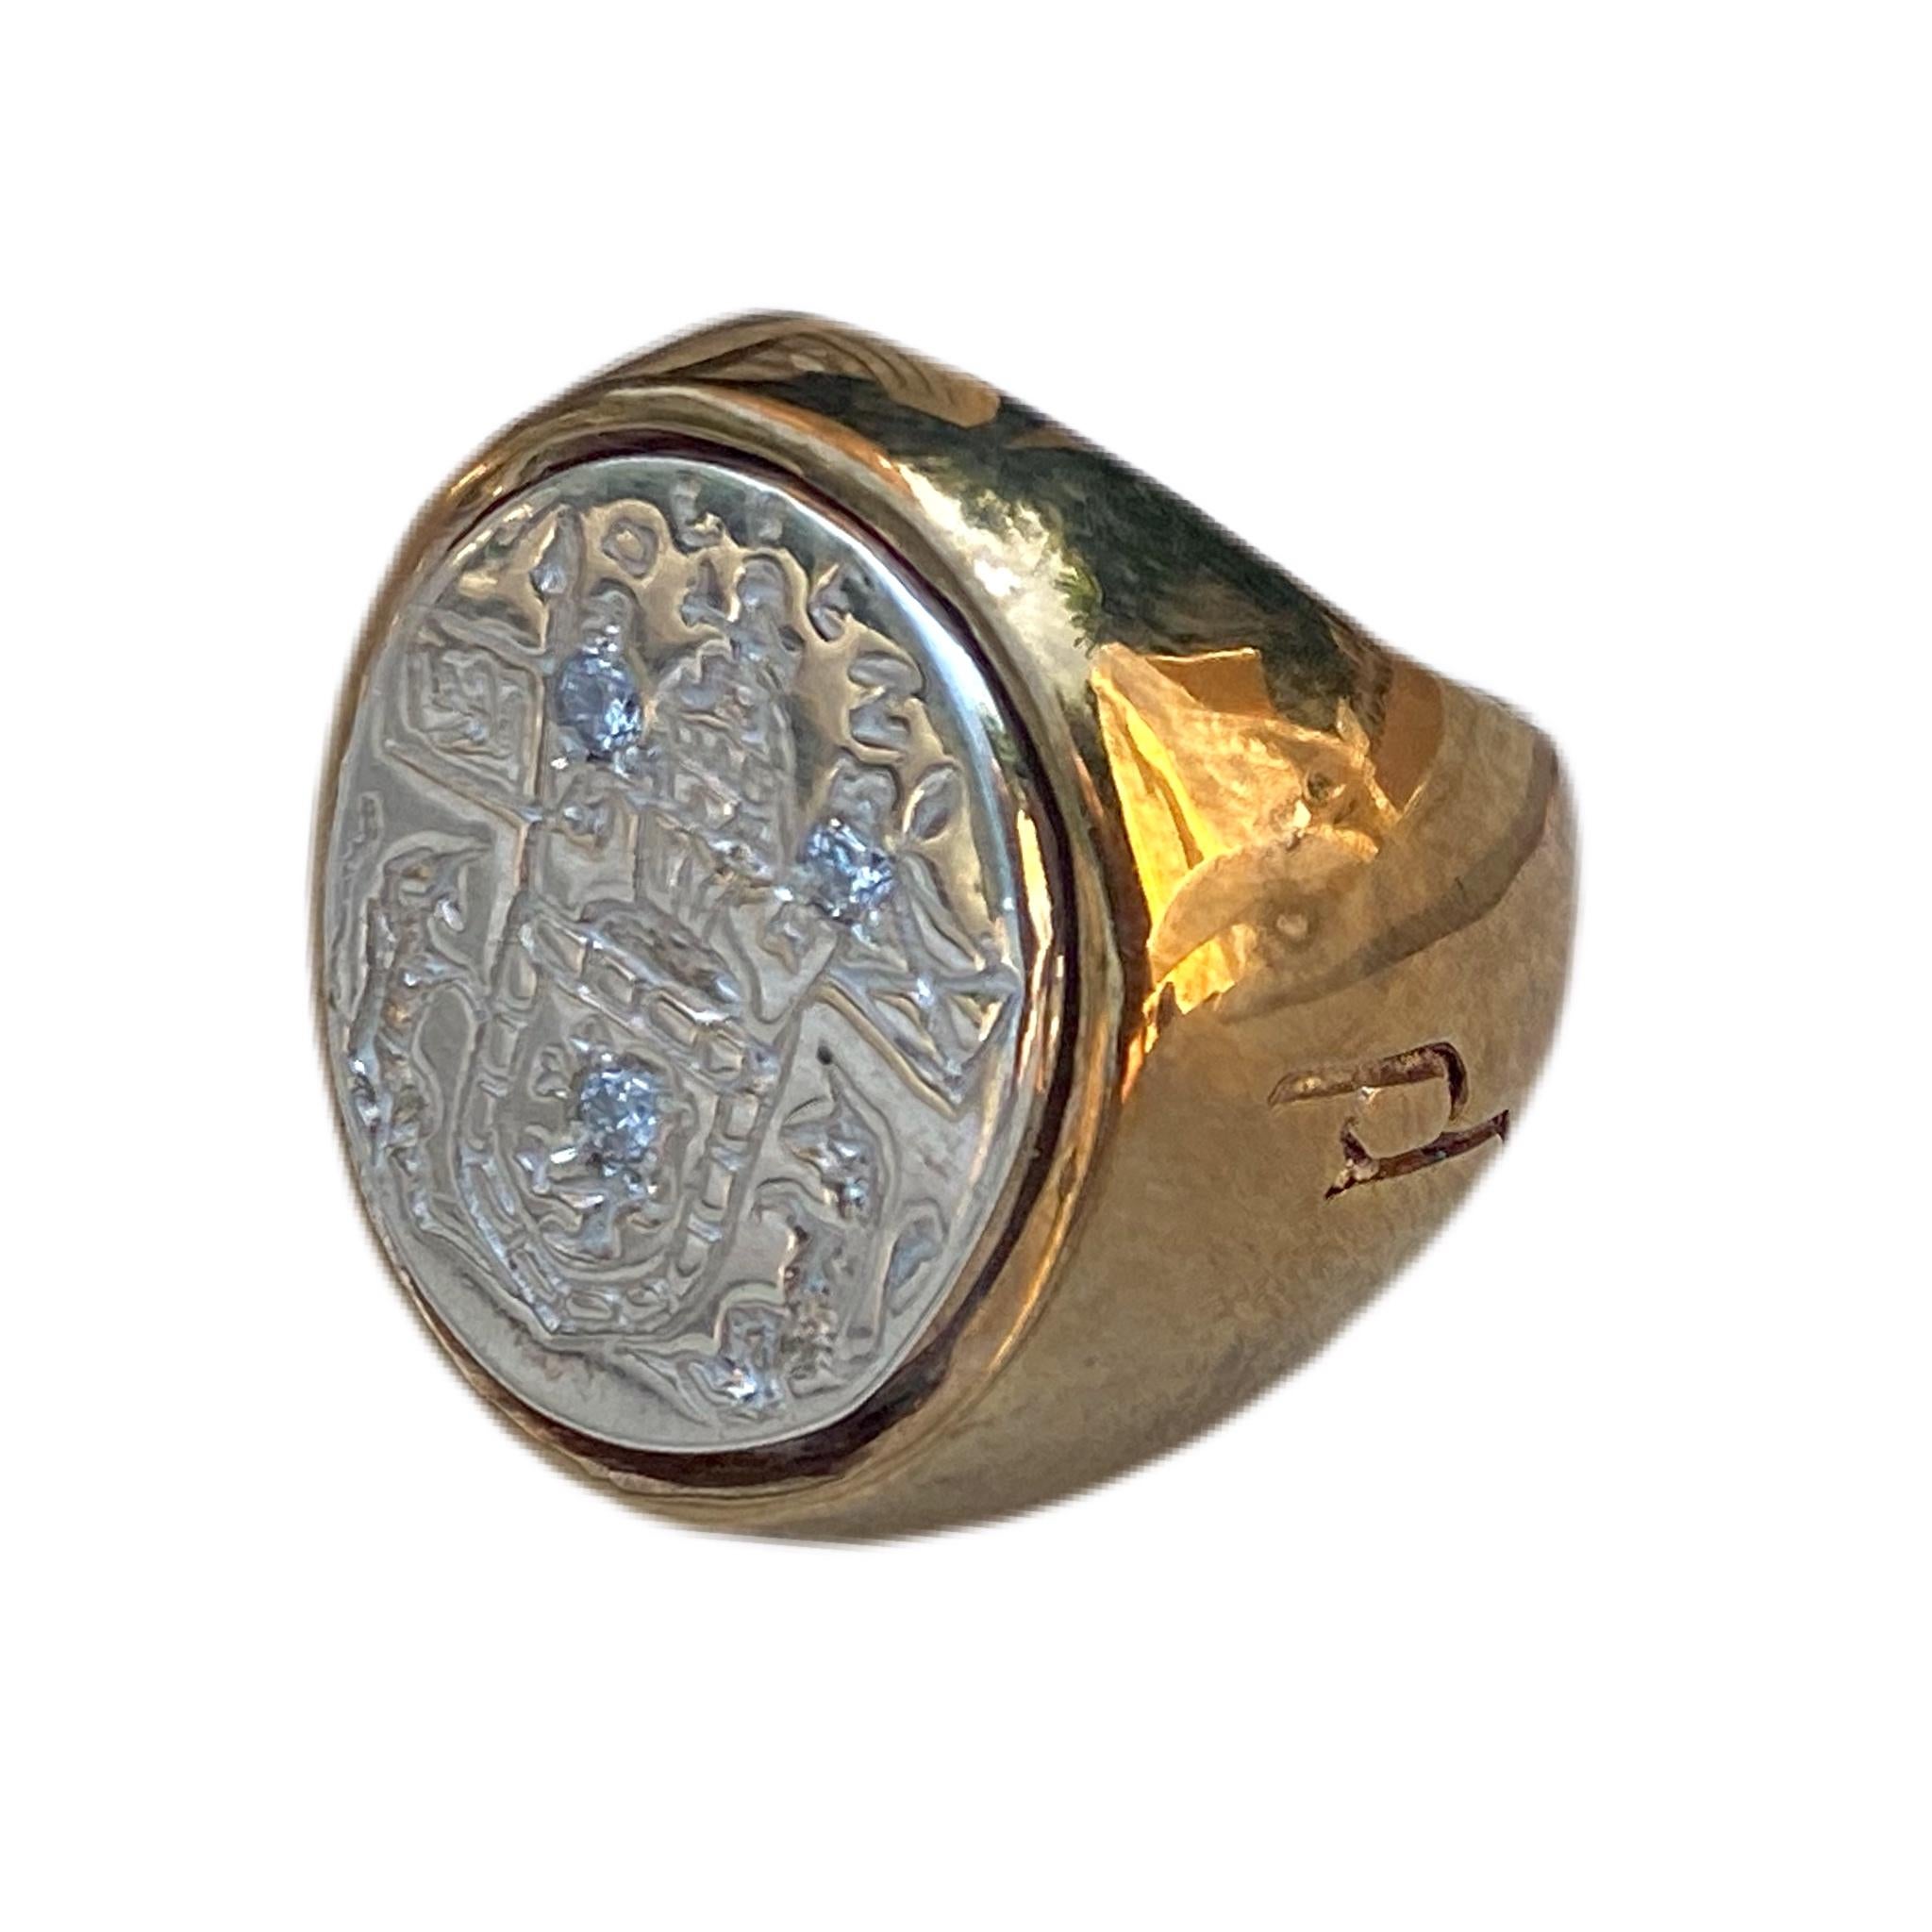 3 pcs Sapphire Crest Signet Ring Sterling Silver Bronze Unisex J Dauphin can be worn by women or men.

Inspired by Queen Mary of Scots ring. Gold signet-ring; engraved; shoulders ornamented with flowers and leaves. Oval bezel set with silver